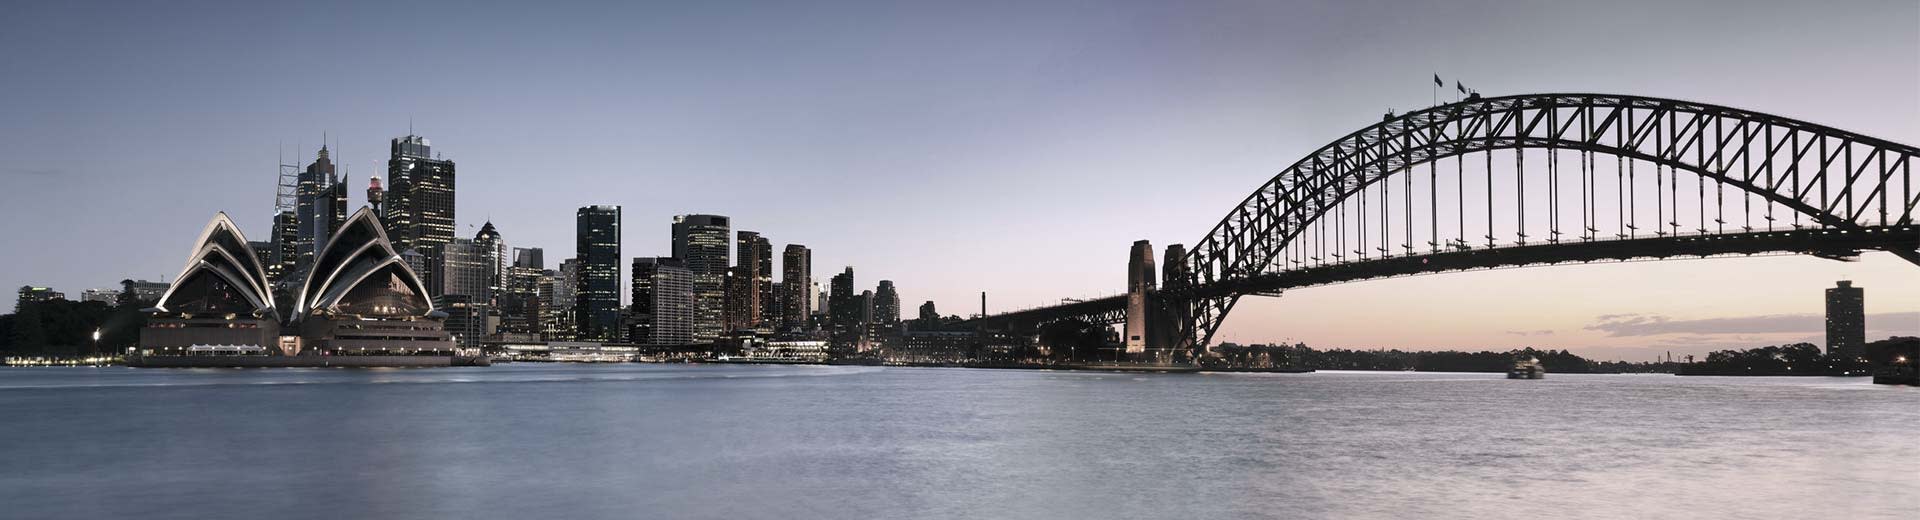 The famous Sydney Opera House dominates this scene, with multiple buildings and the Sydney Bridge on the right hand side.